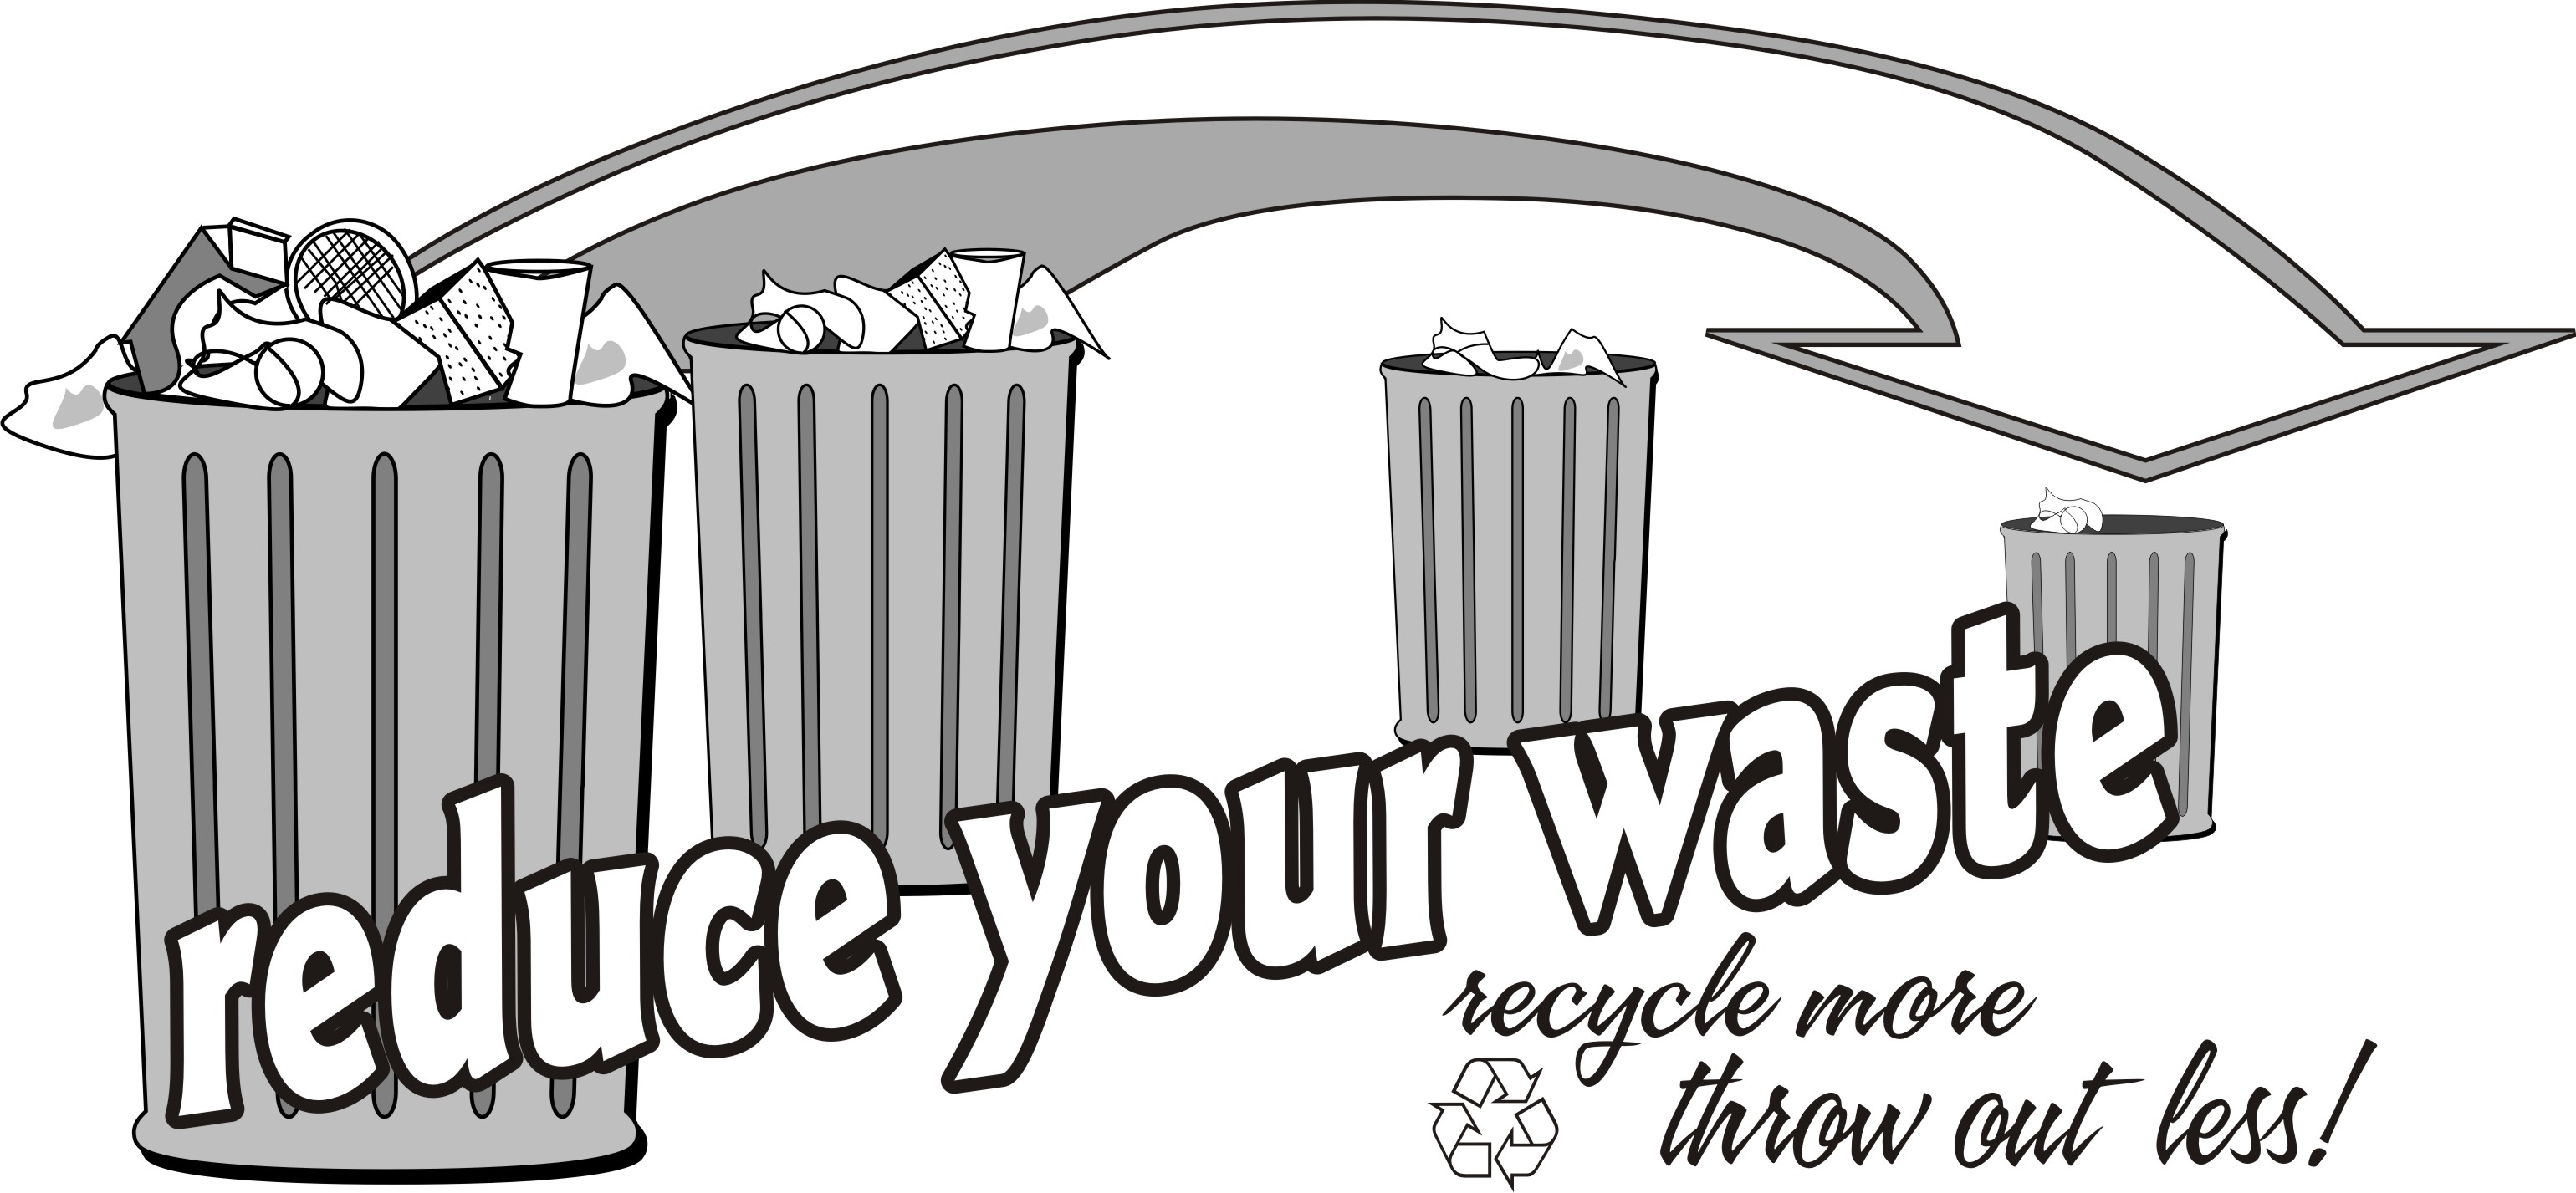 Reduce mean. Reduce картинки. Reduce waste. Reduce reuse recycle. Reduce your waste.